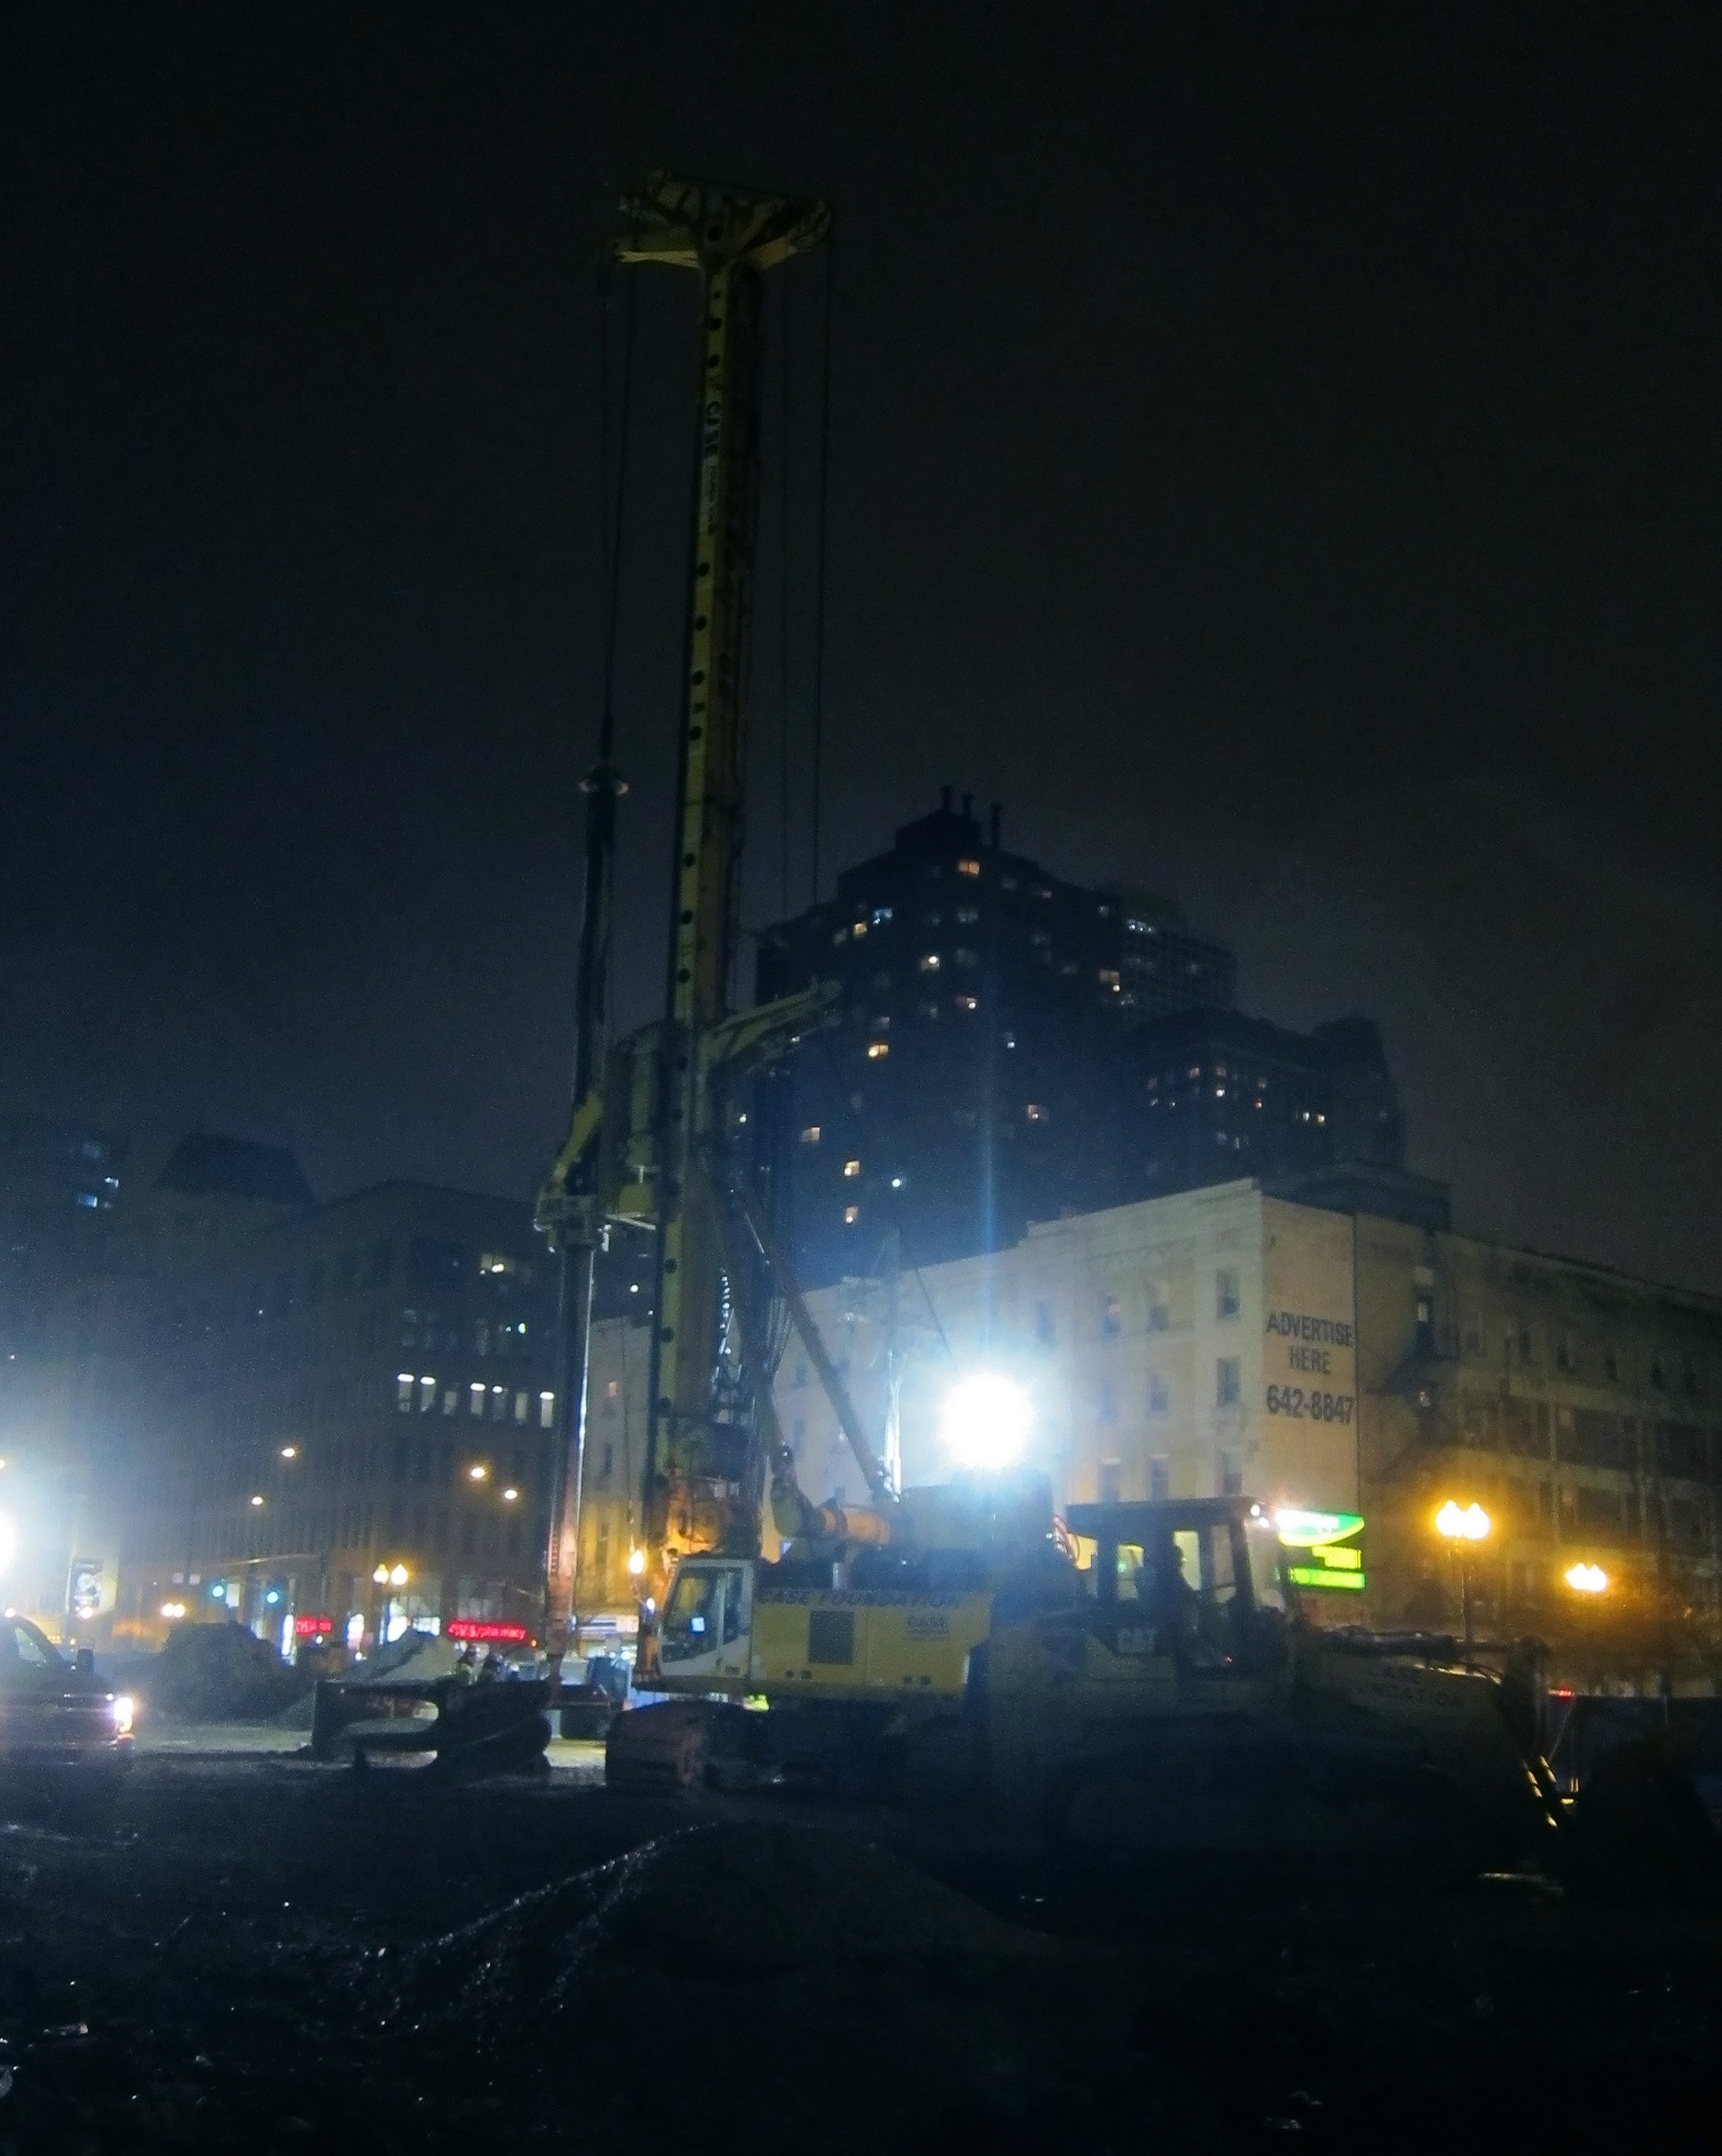 Night-time construction at Clark and Division, Chicago